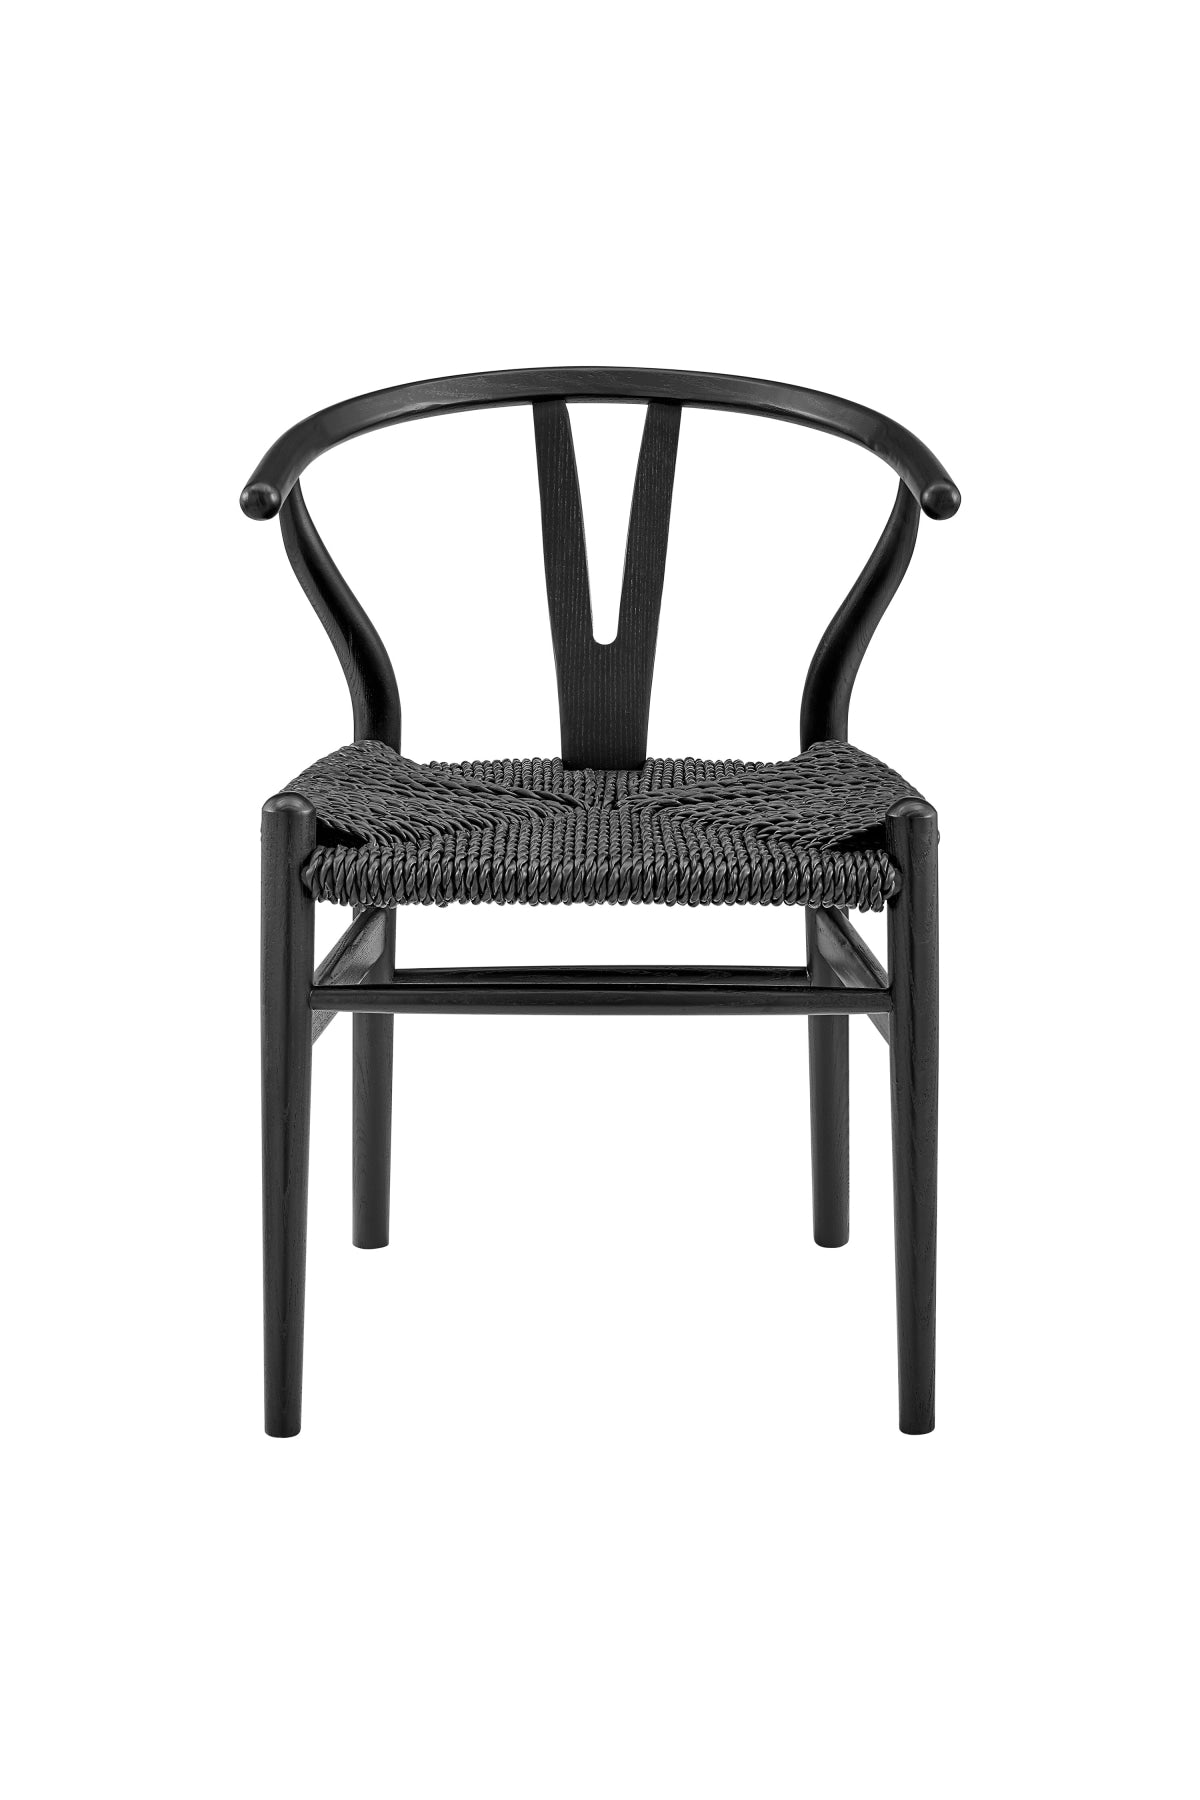 Fowler Outdoor Side Chair - Black - Set of 2